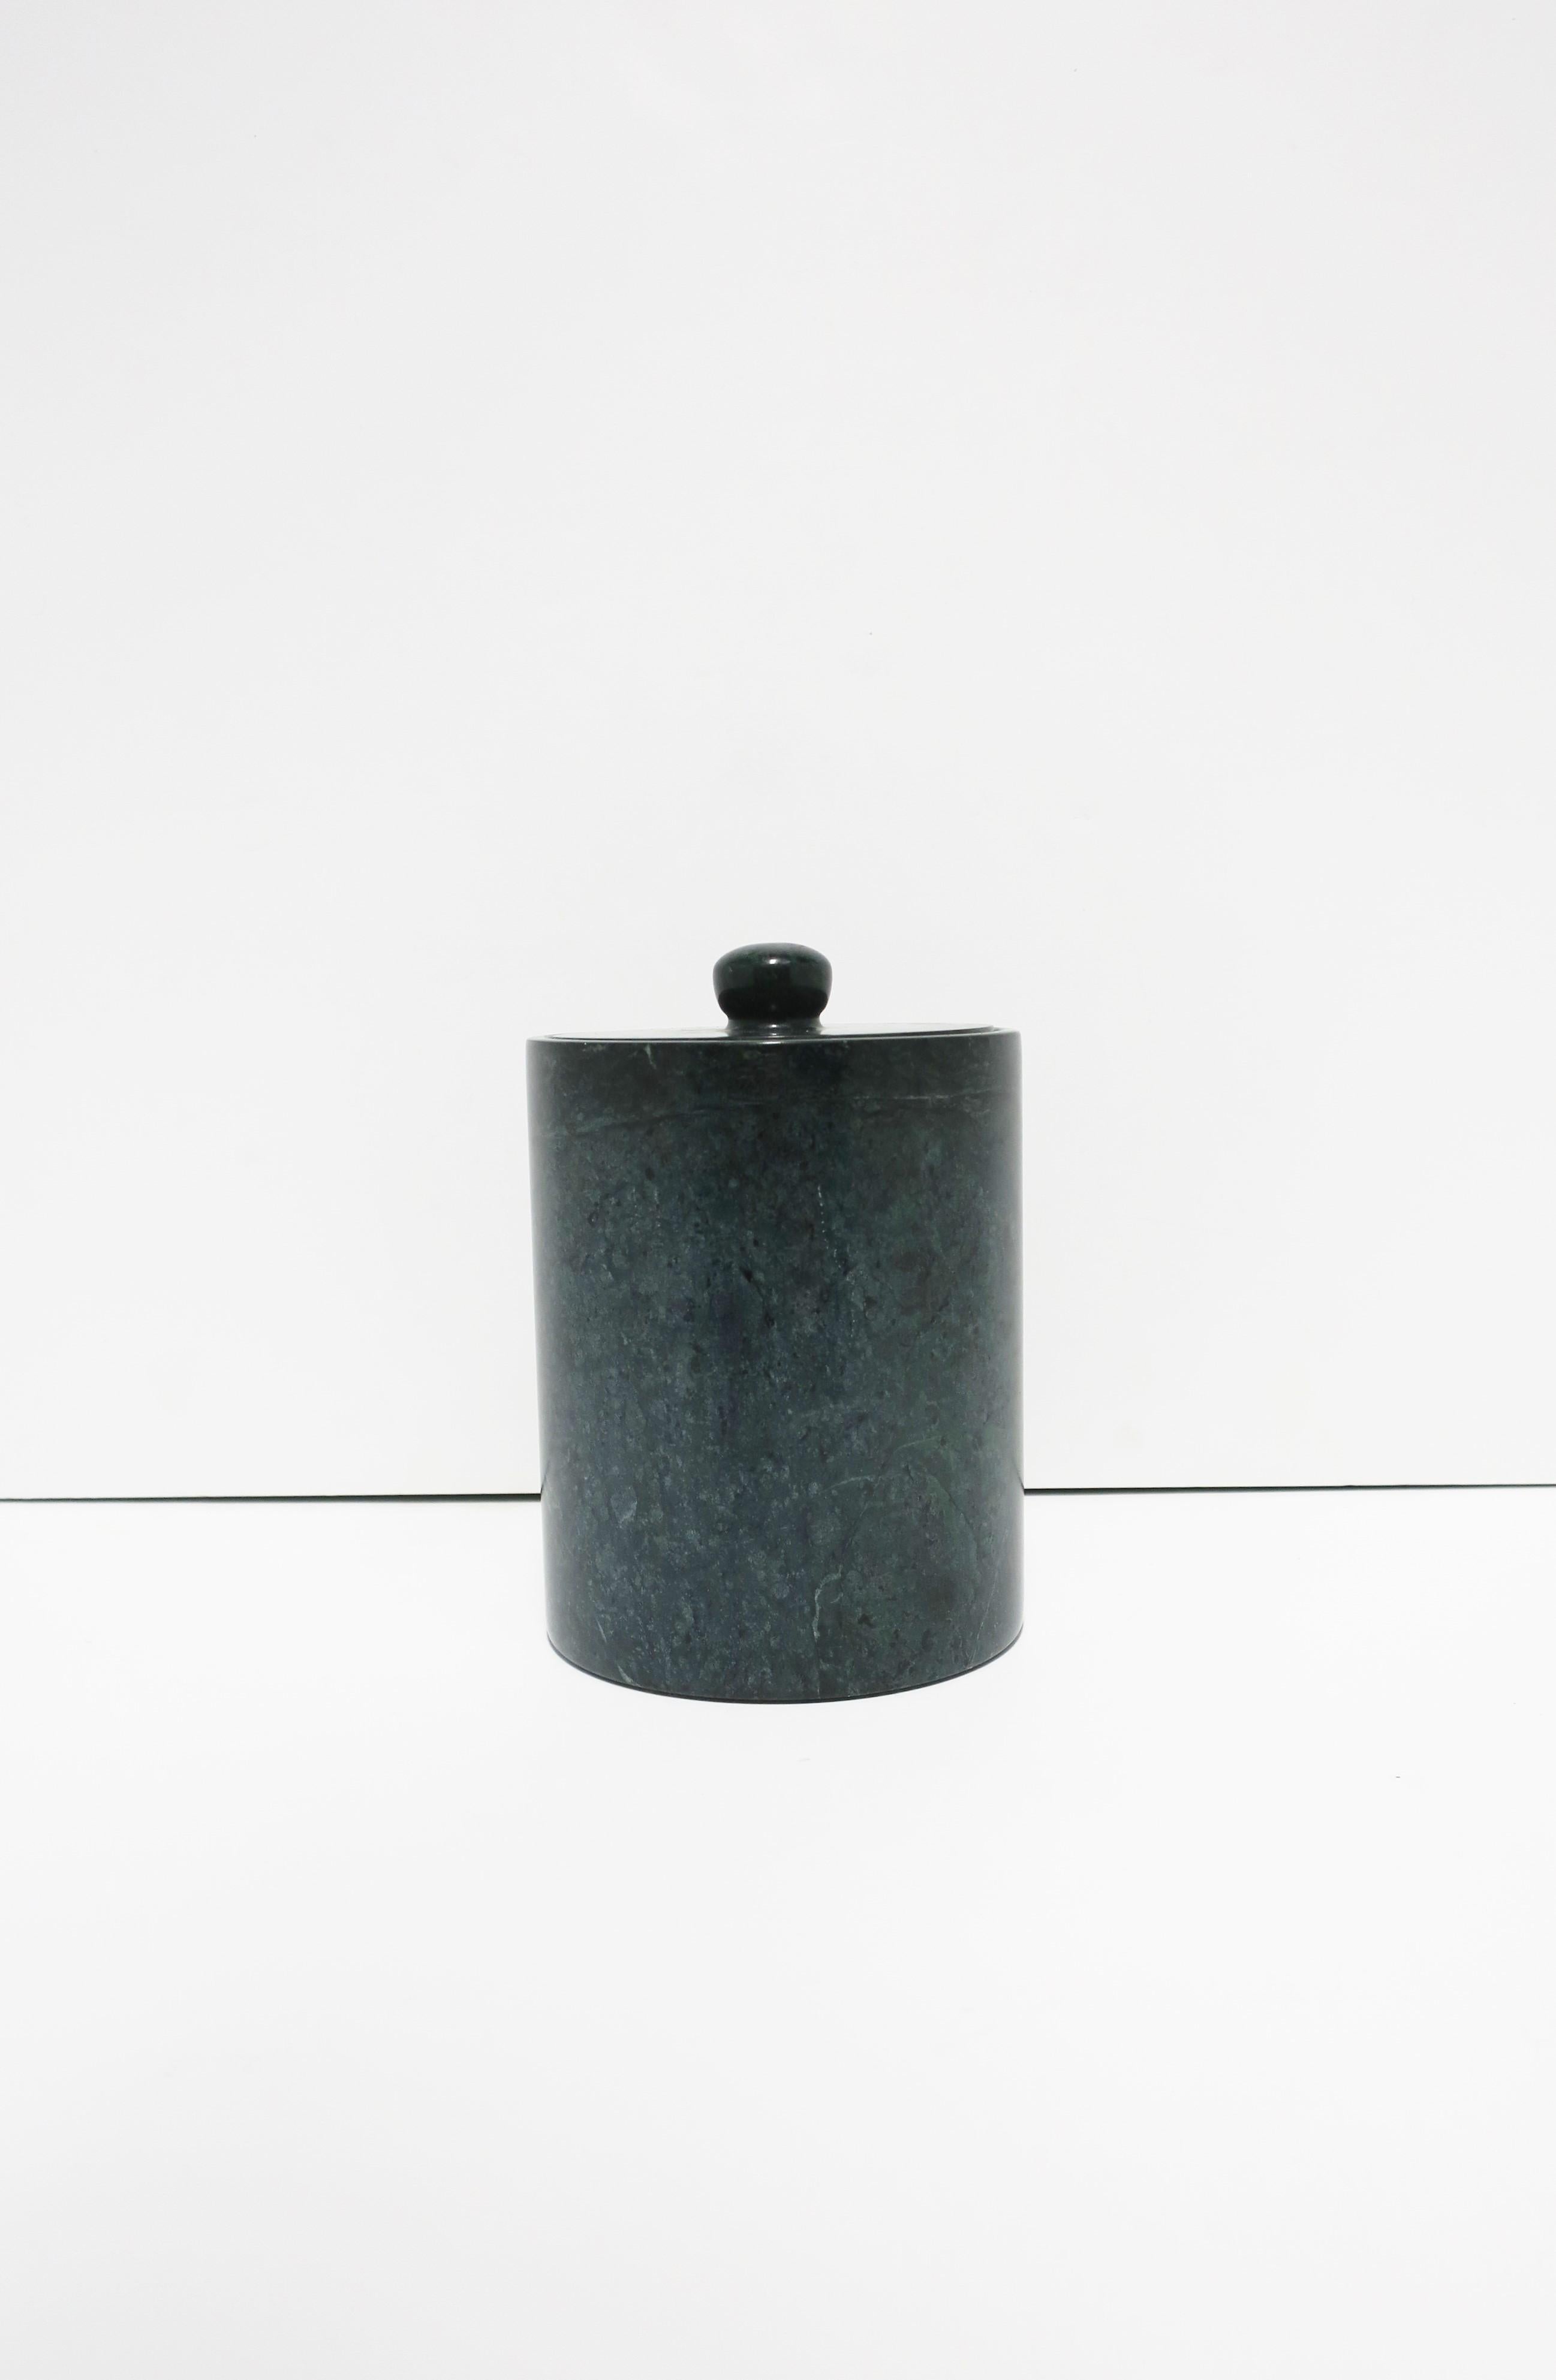 A substantial dark green marble vessel box with lid, circa late-20th century. Piece is dark and medium green hues with traces of white as shown. This round cylindrical box has an internal teak wood separator, which is removable (as shown), finished